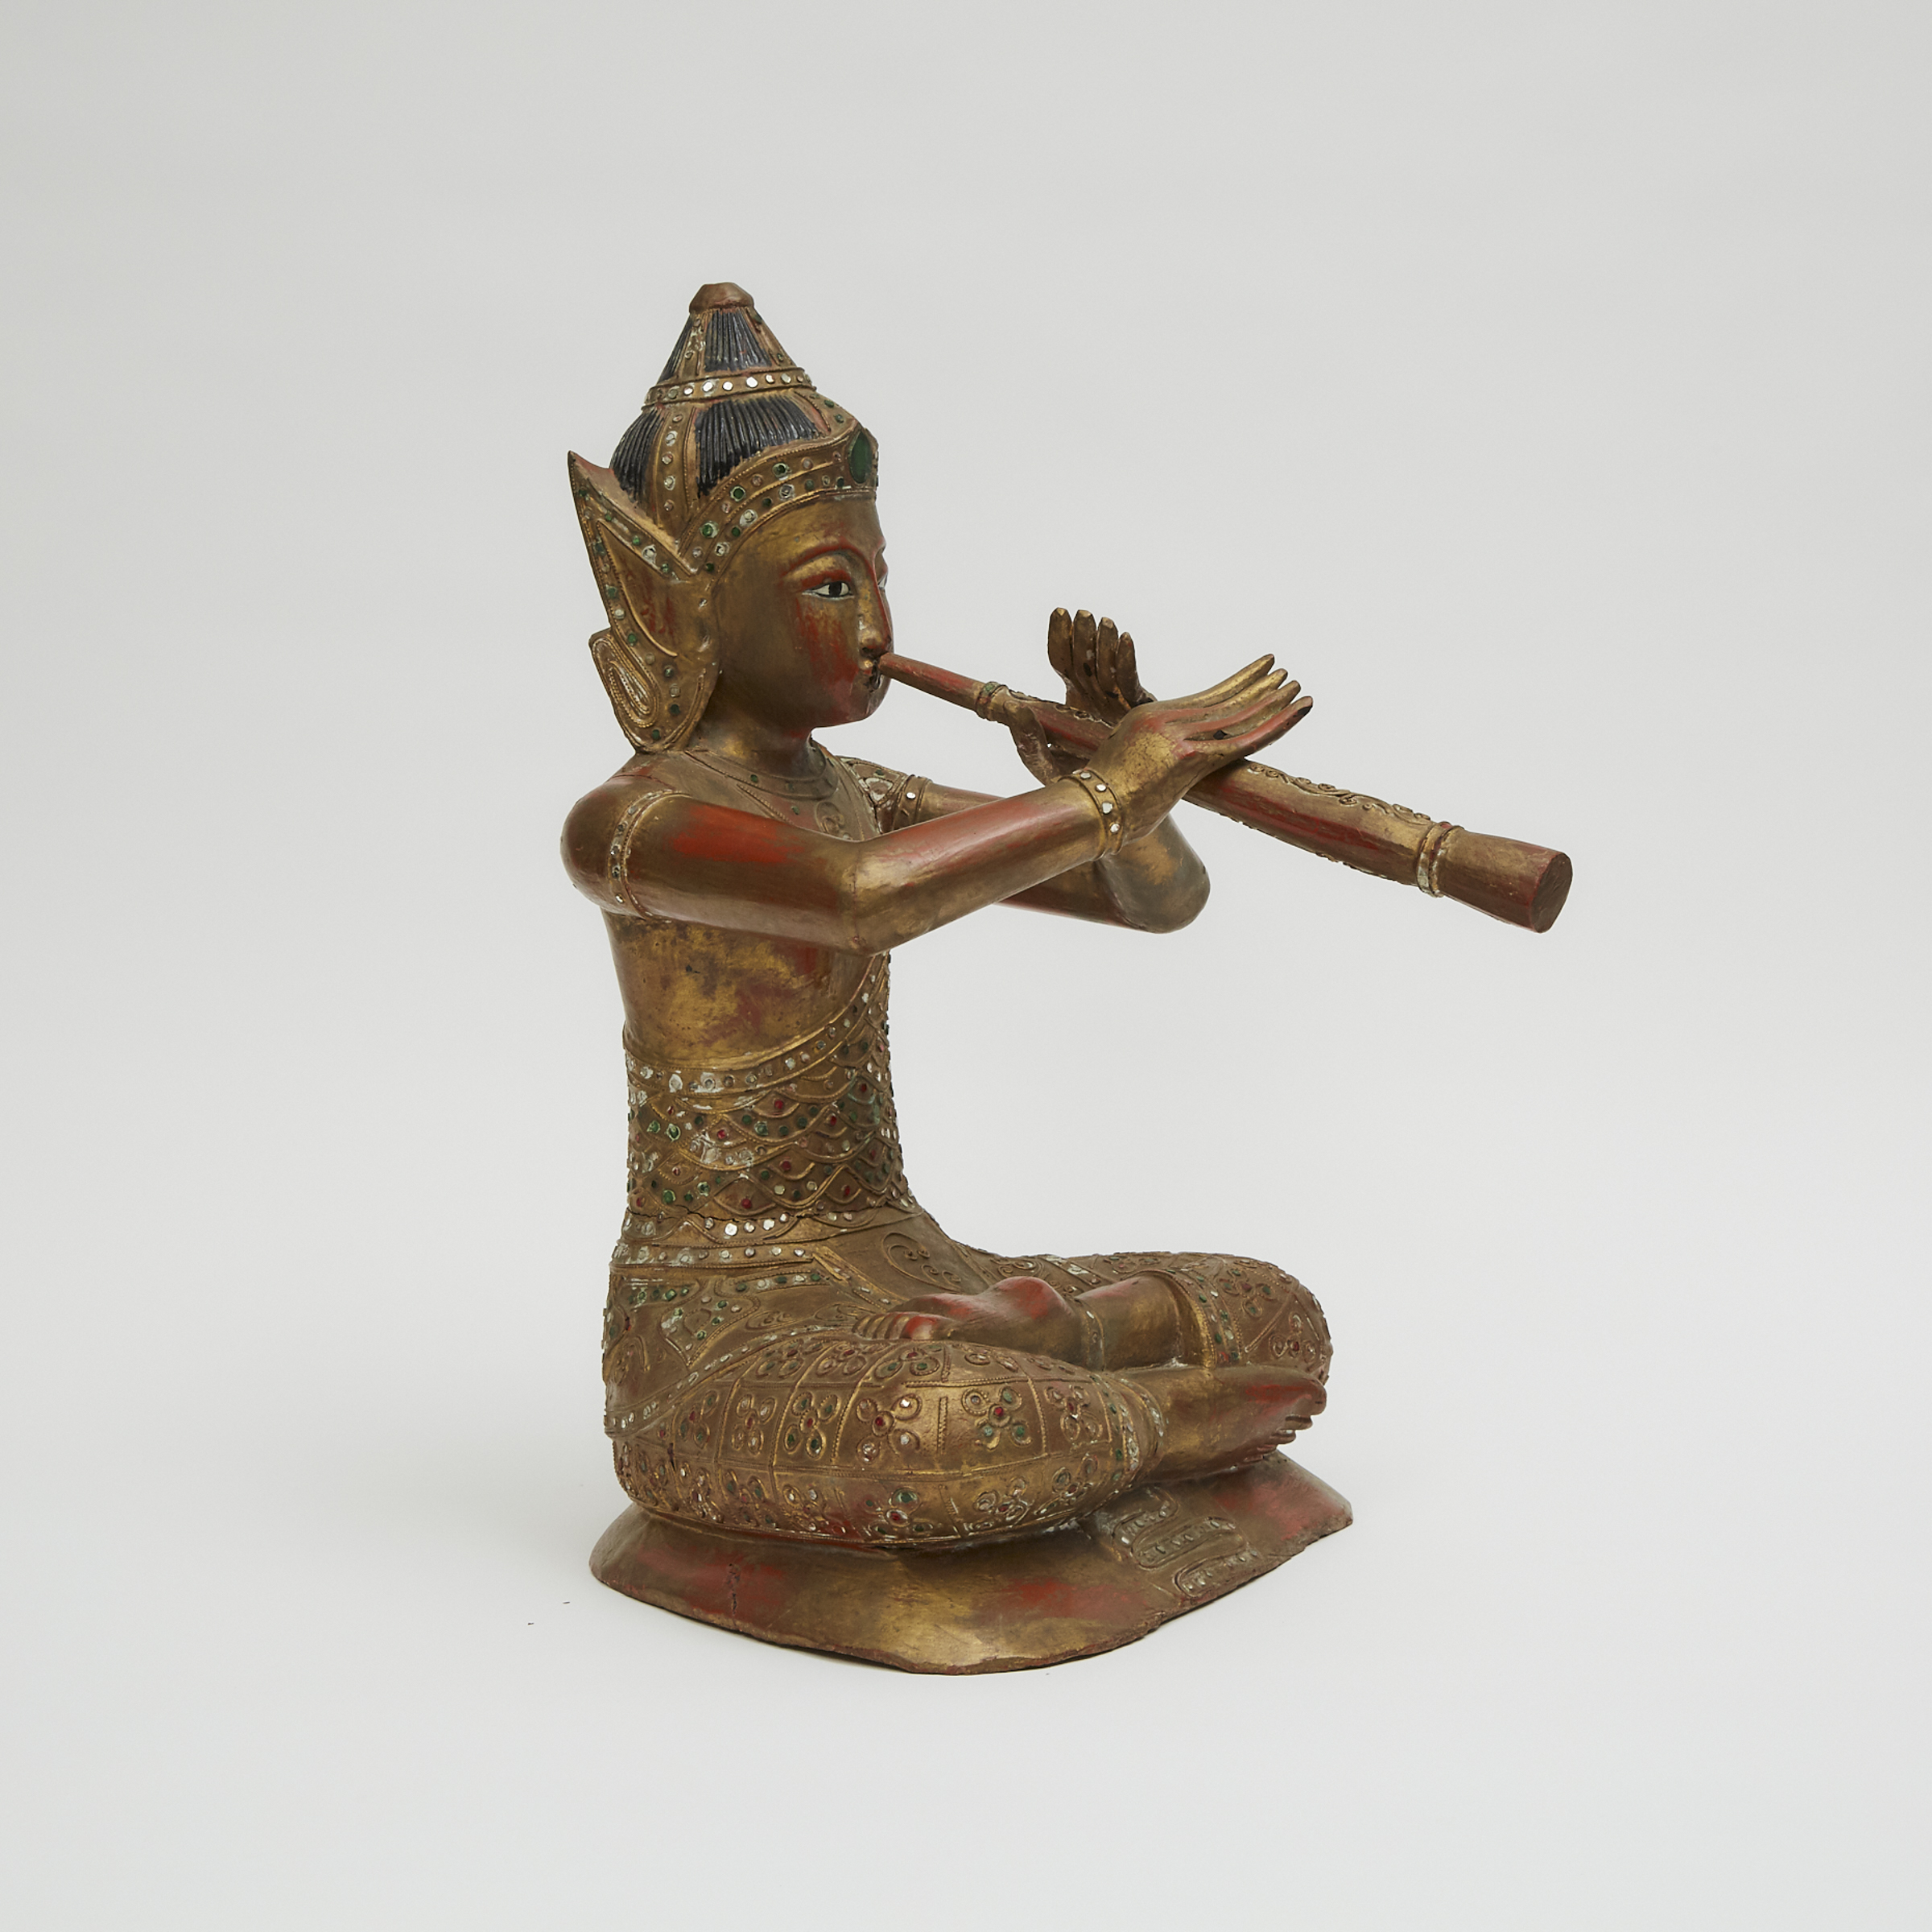 A Thai Lacquer Wood Figure of a Musician